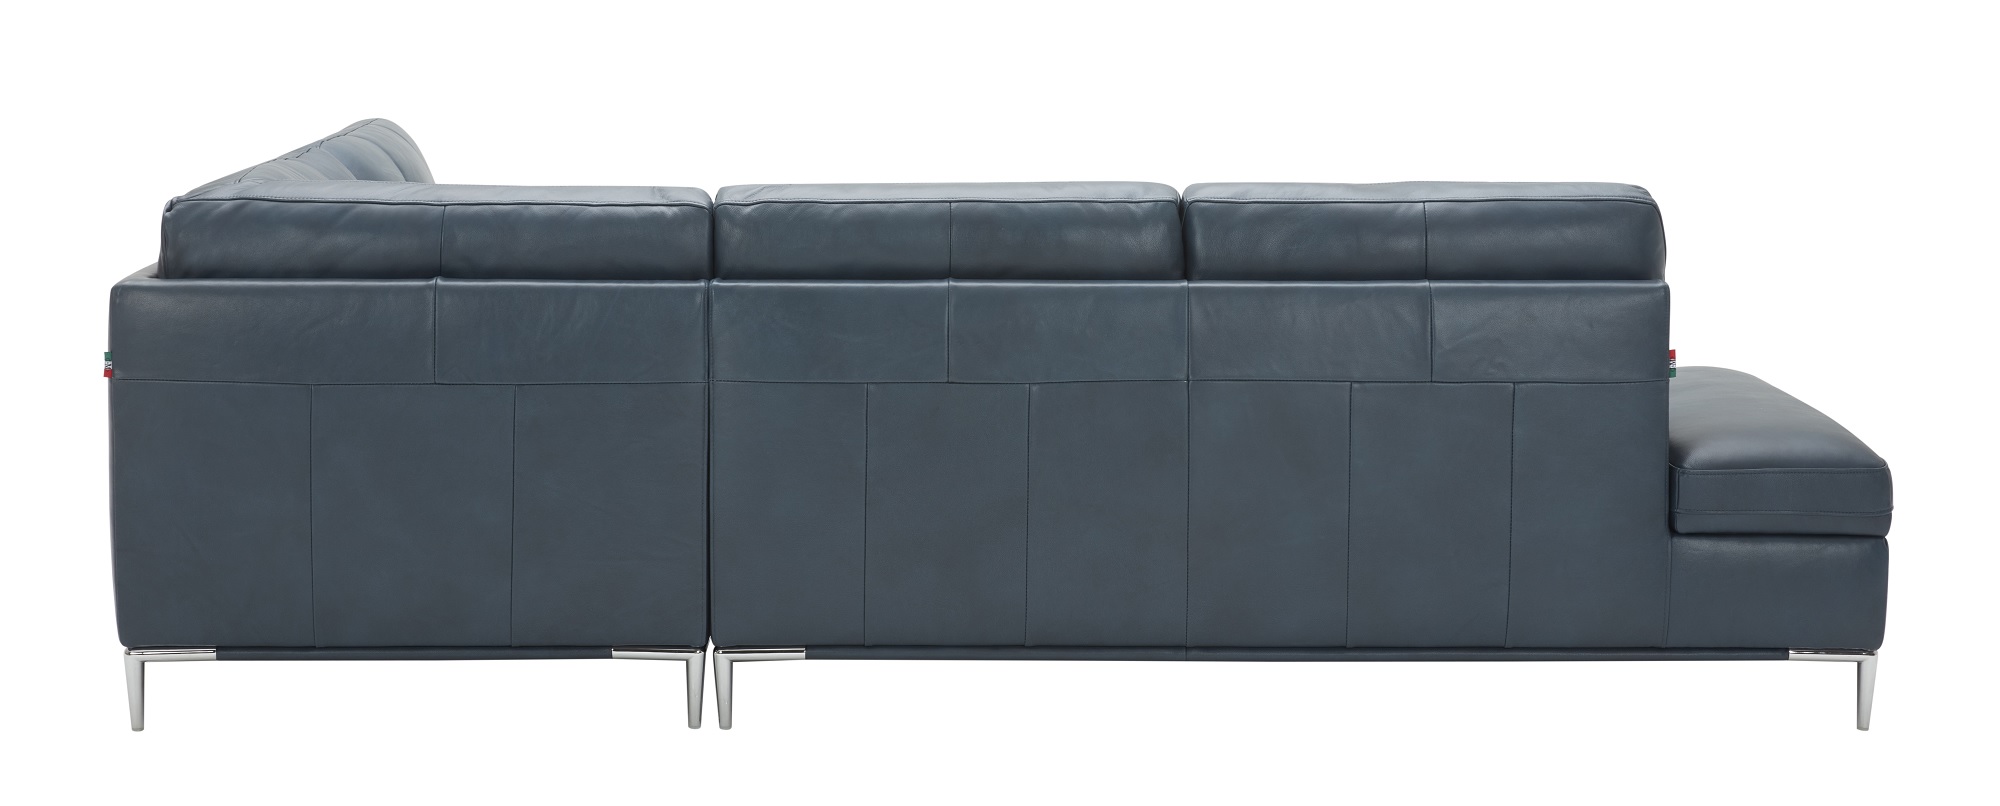 Advanced Adjustable Tufted Leather Corner Sectional Sofa with Pillows - Click Image to Close